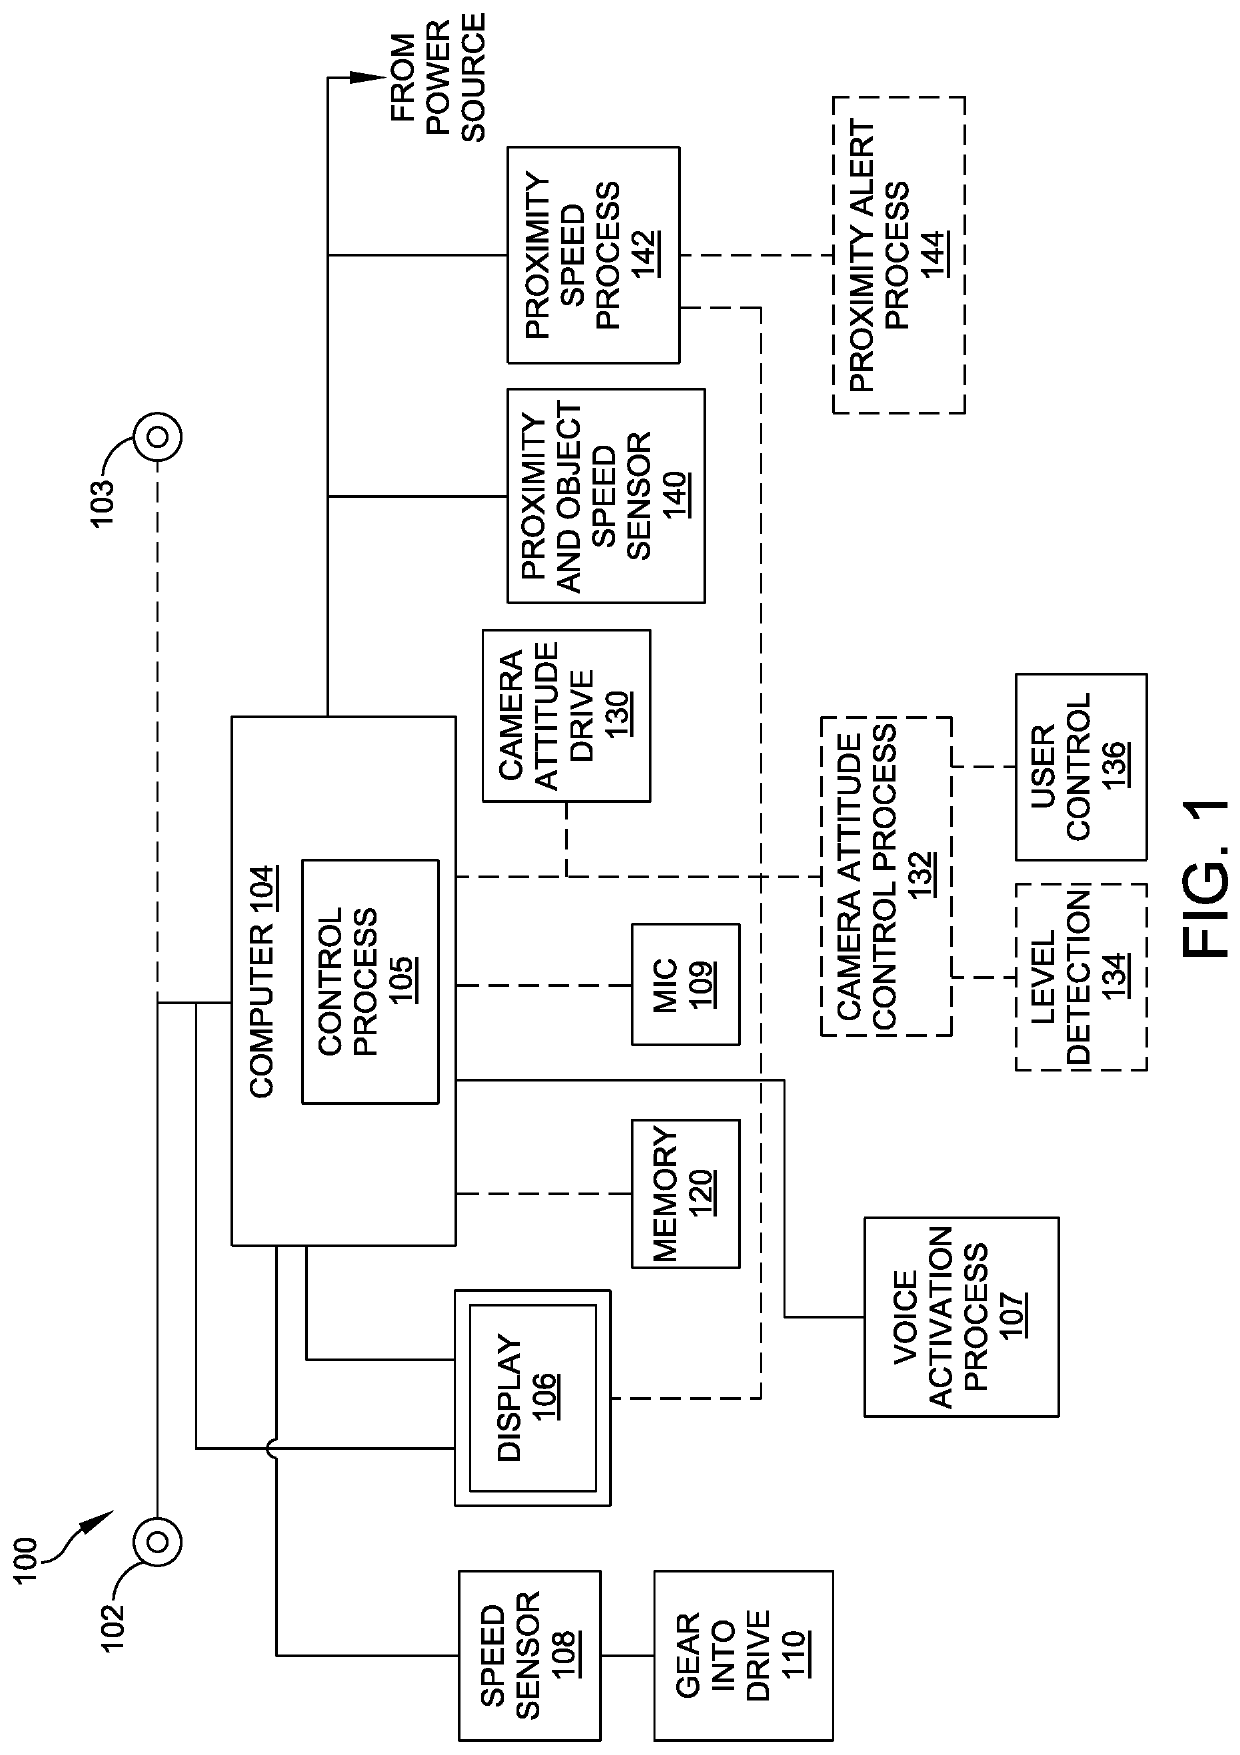 System and method for providing front-oriented visual information to vehicle driver